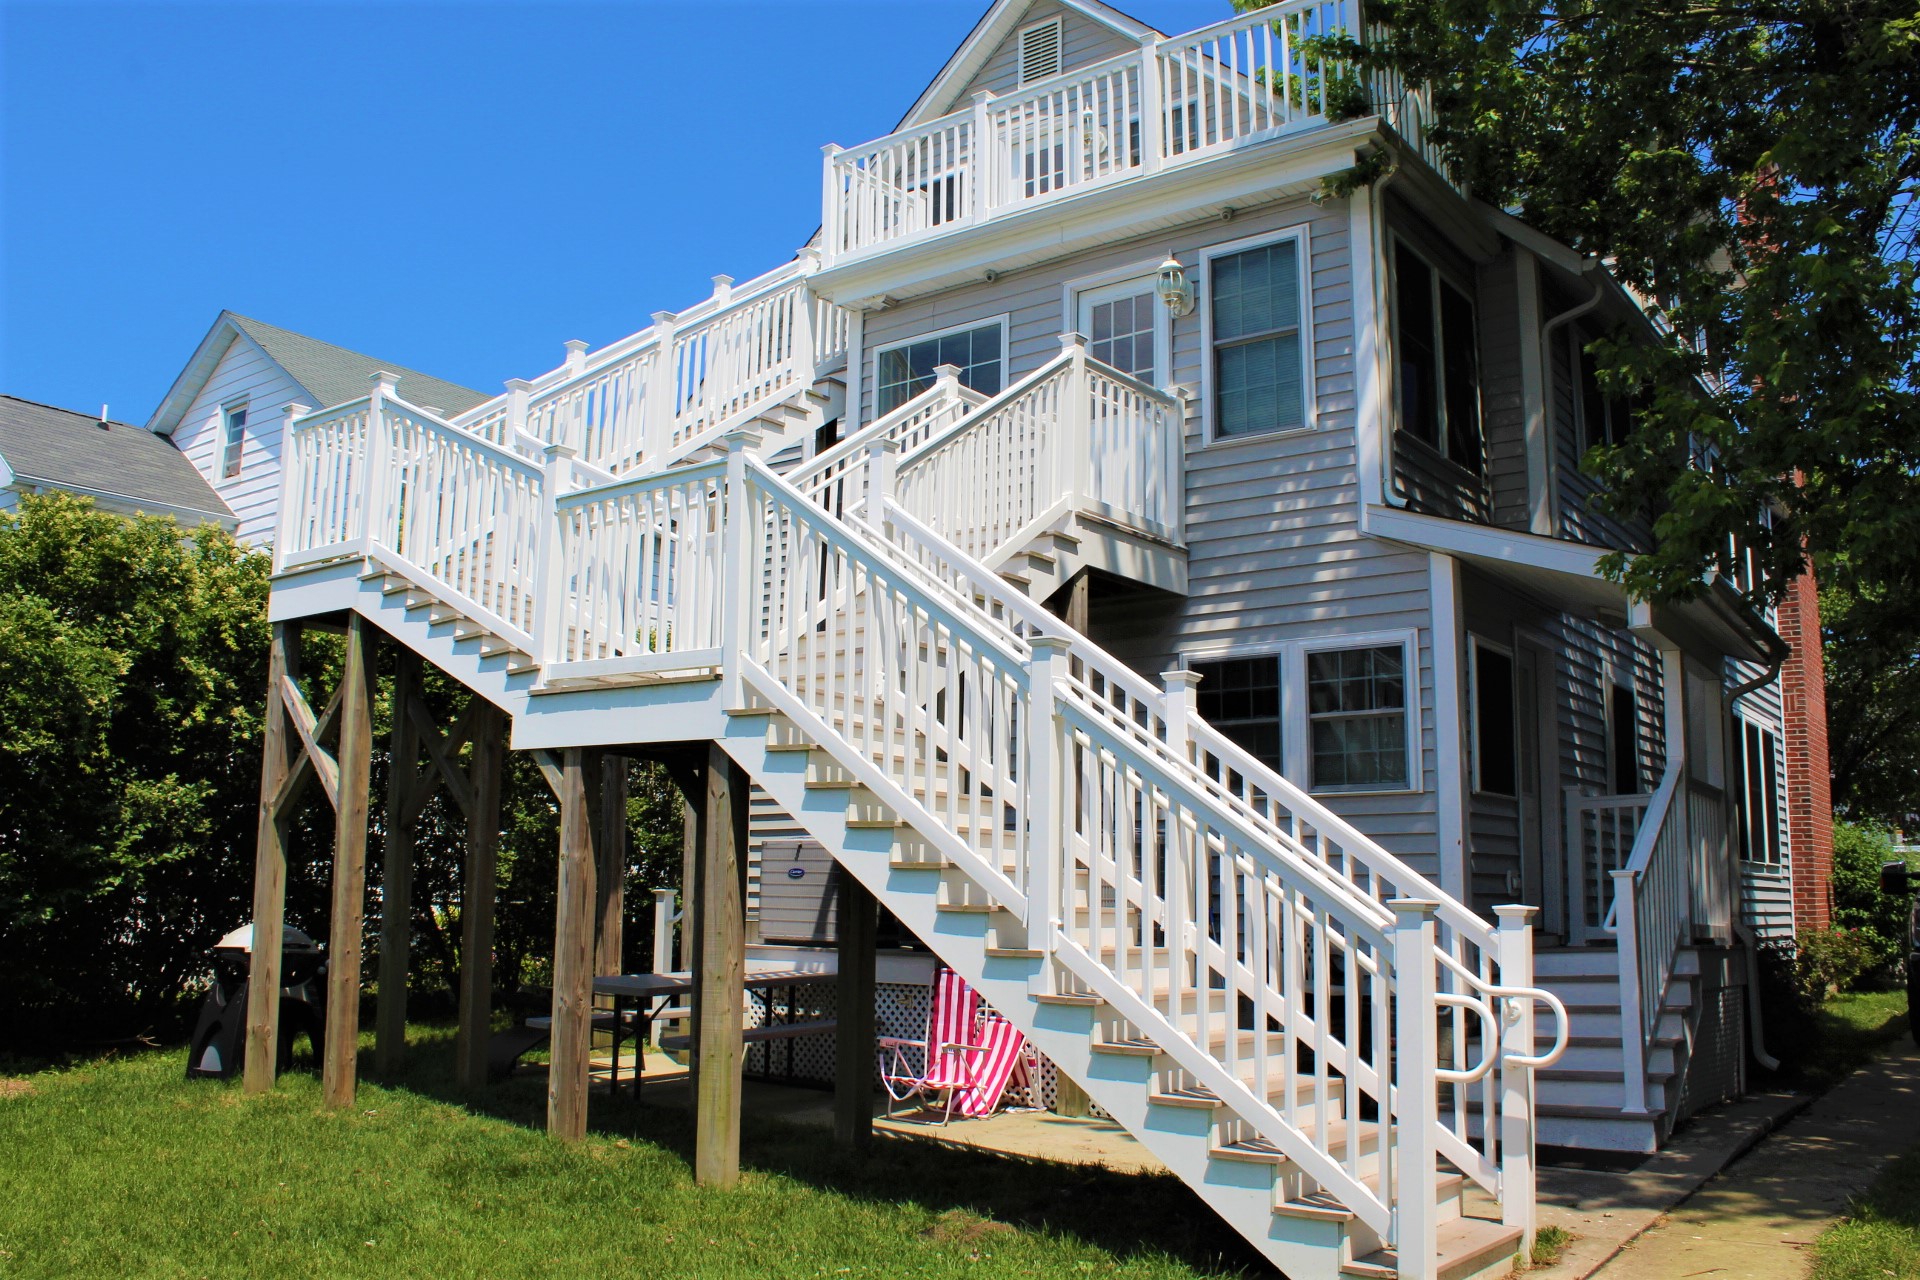 Large Beach House | Vacation Rentals Ocean City, MD | Vacation In OC